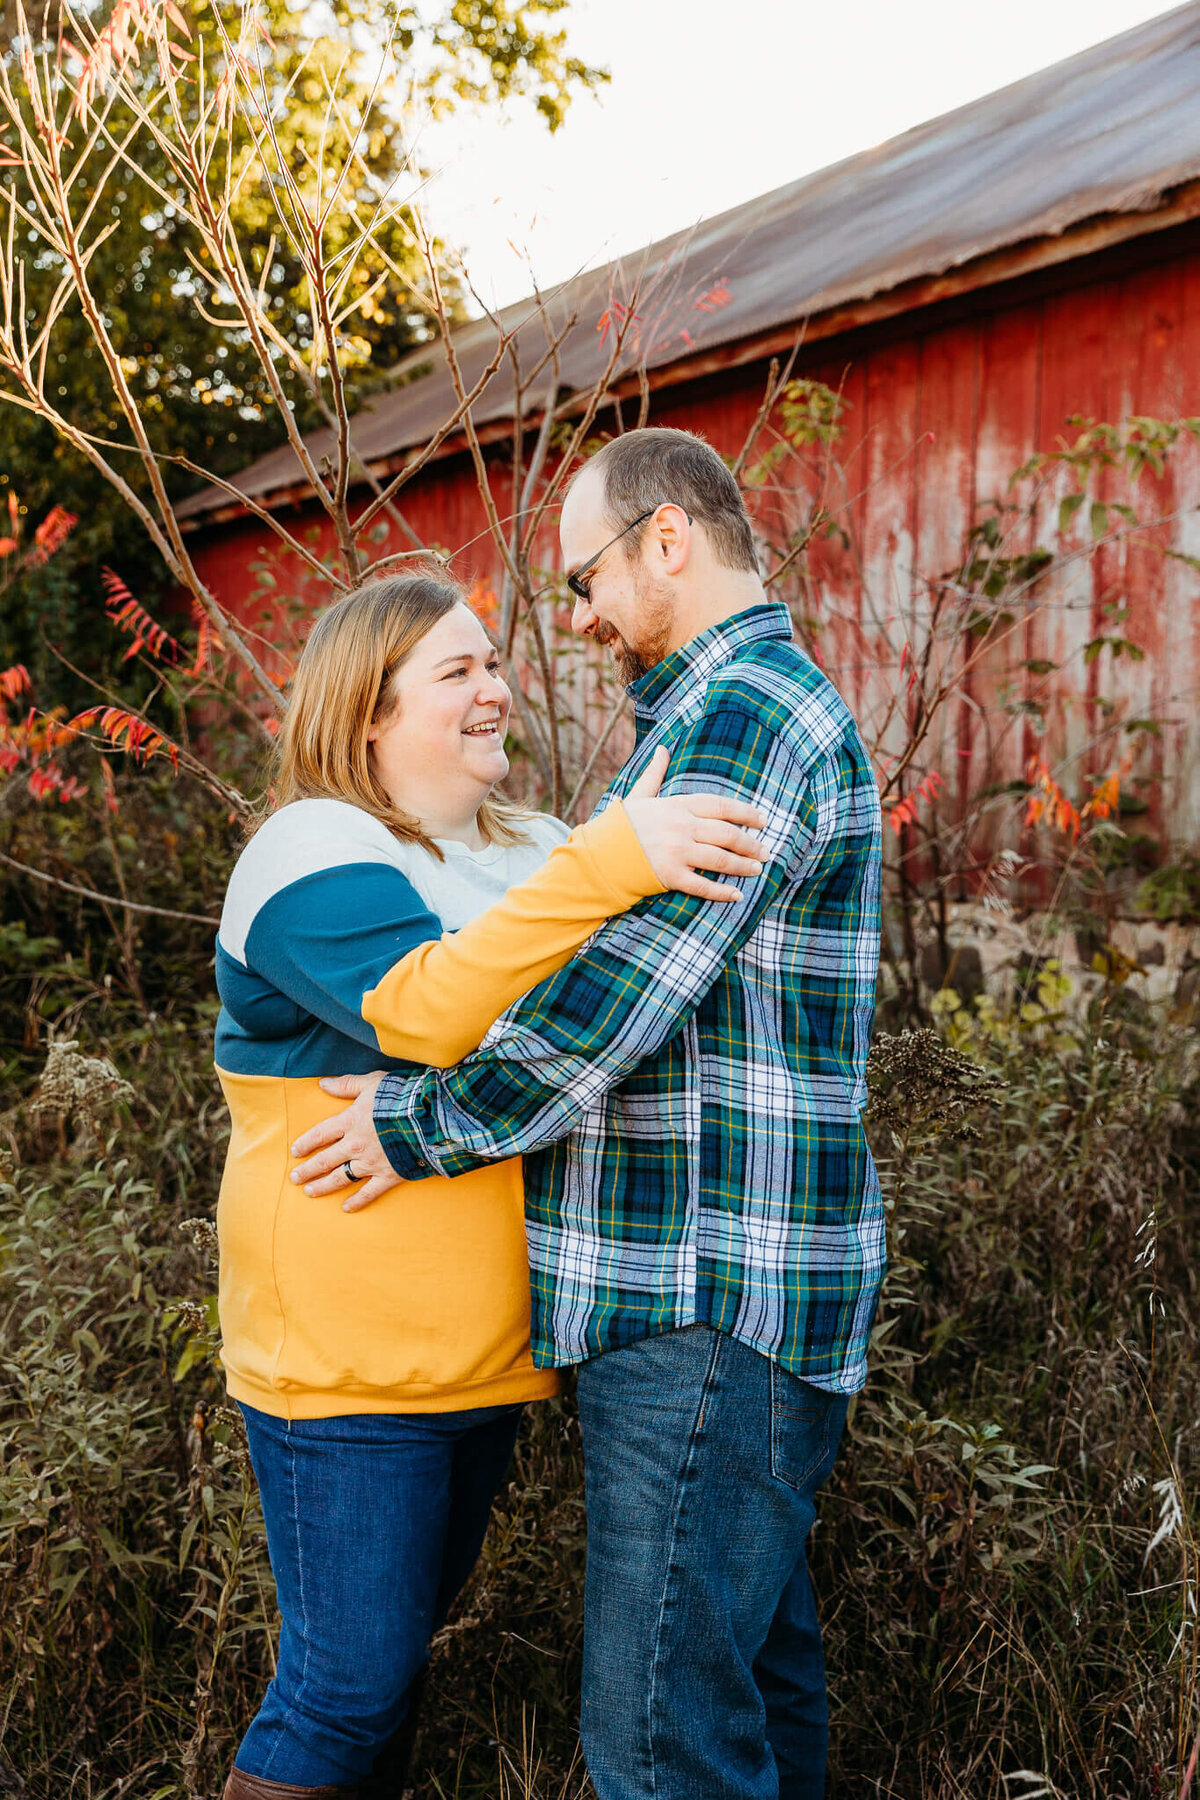 Beautiful couple laughing with each other at a rustic location for photo session